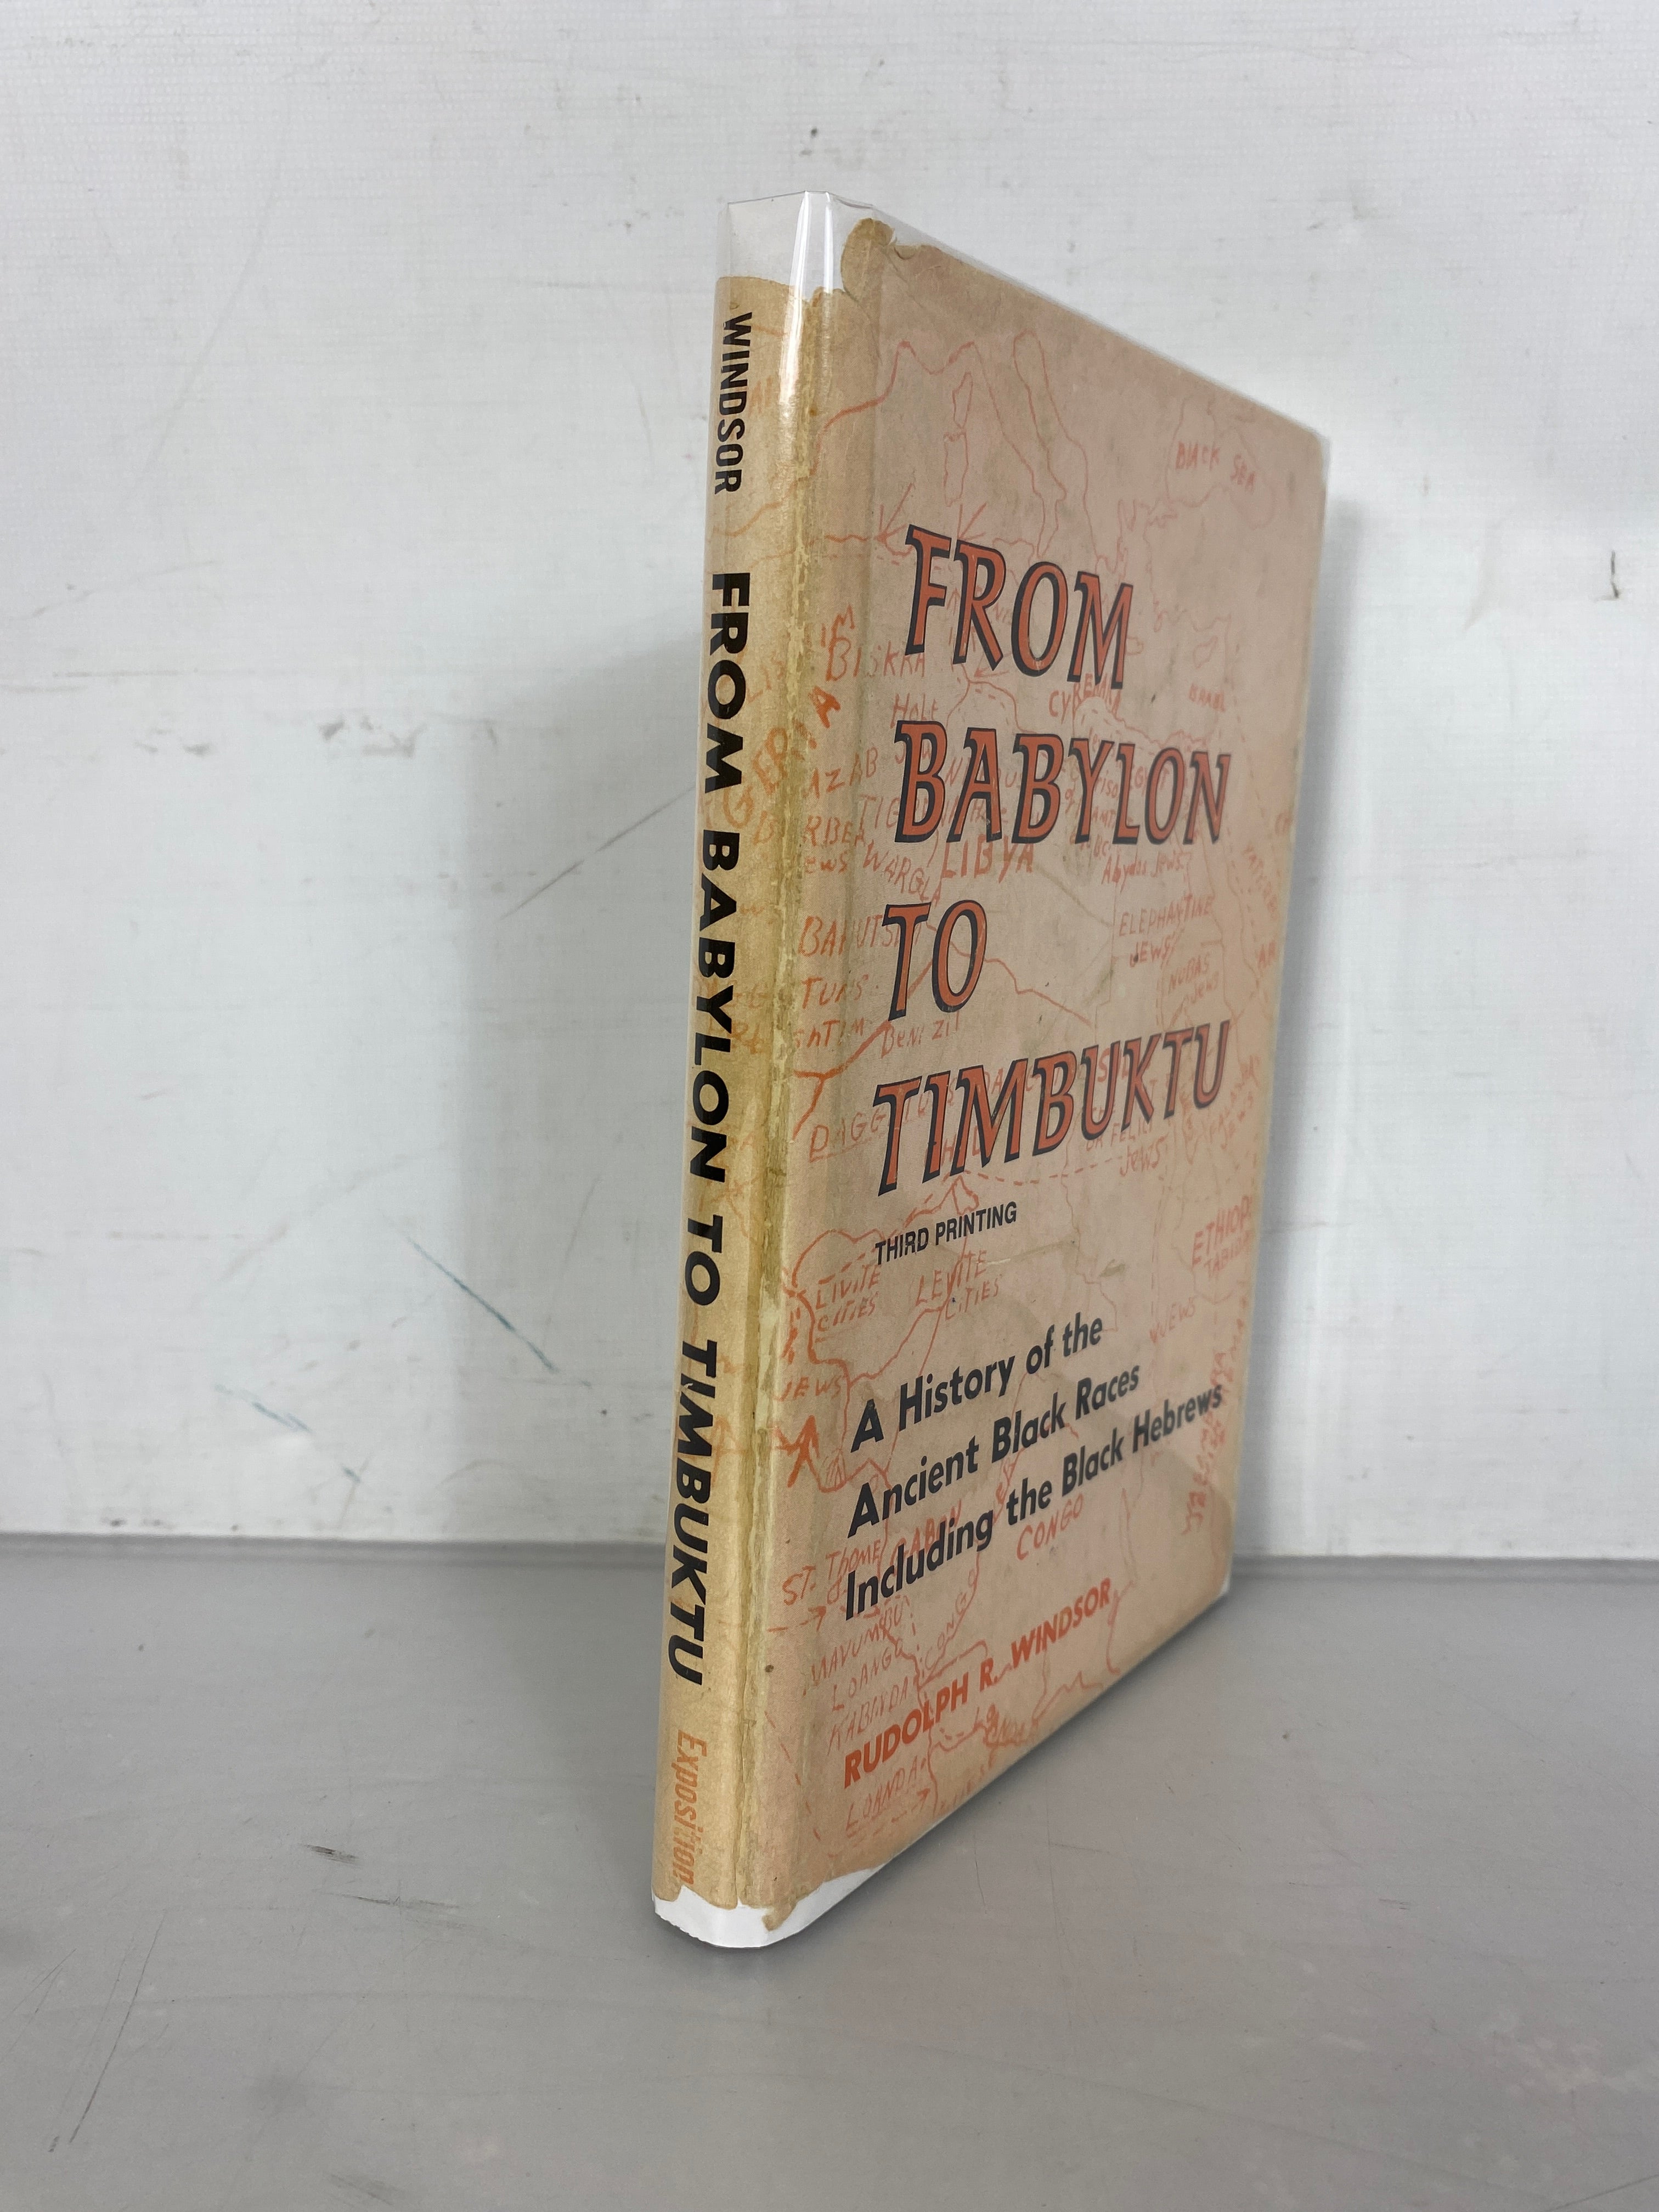 From Babylon to Timbuktu by Rudolph Windsor A History of the Ancient Black Races (1976) Third Printing HC DJ (Copy) (Copy)